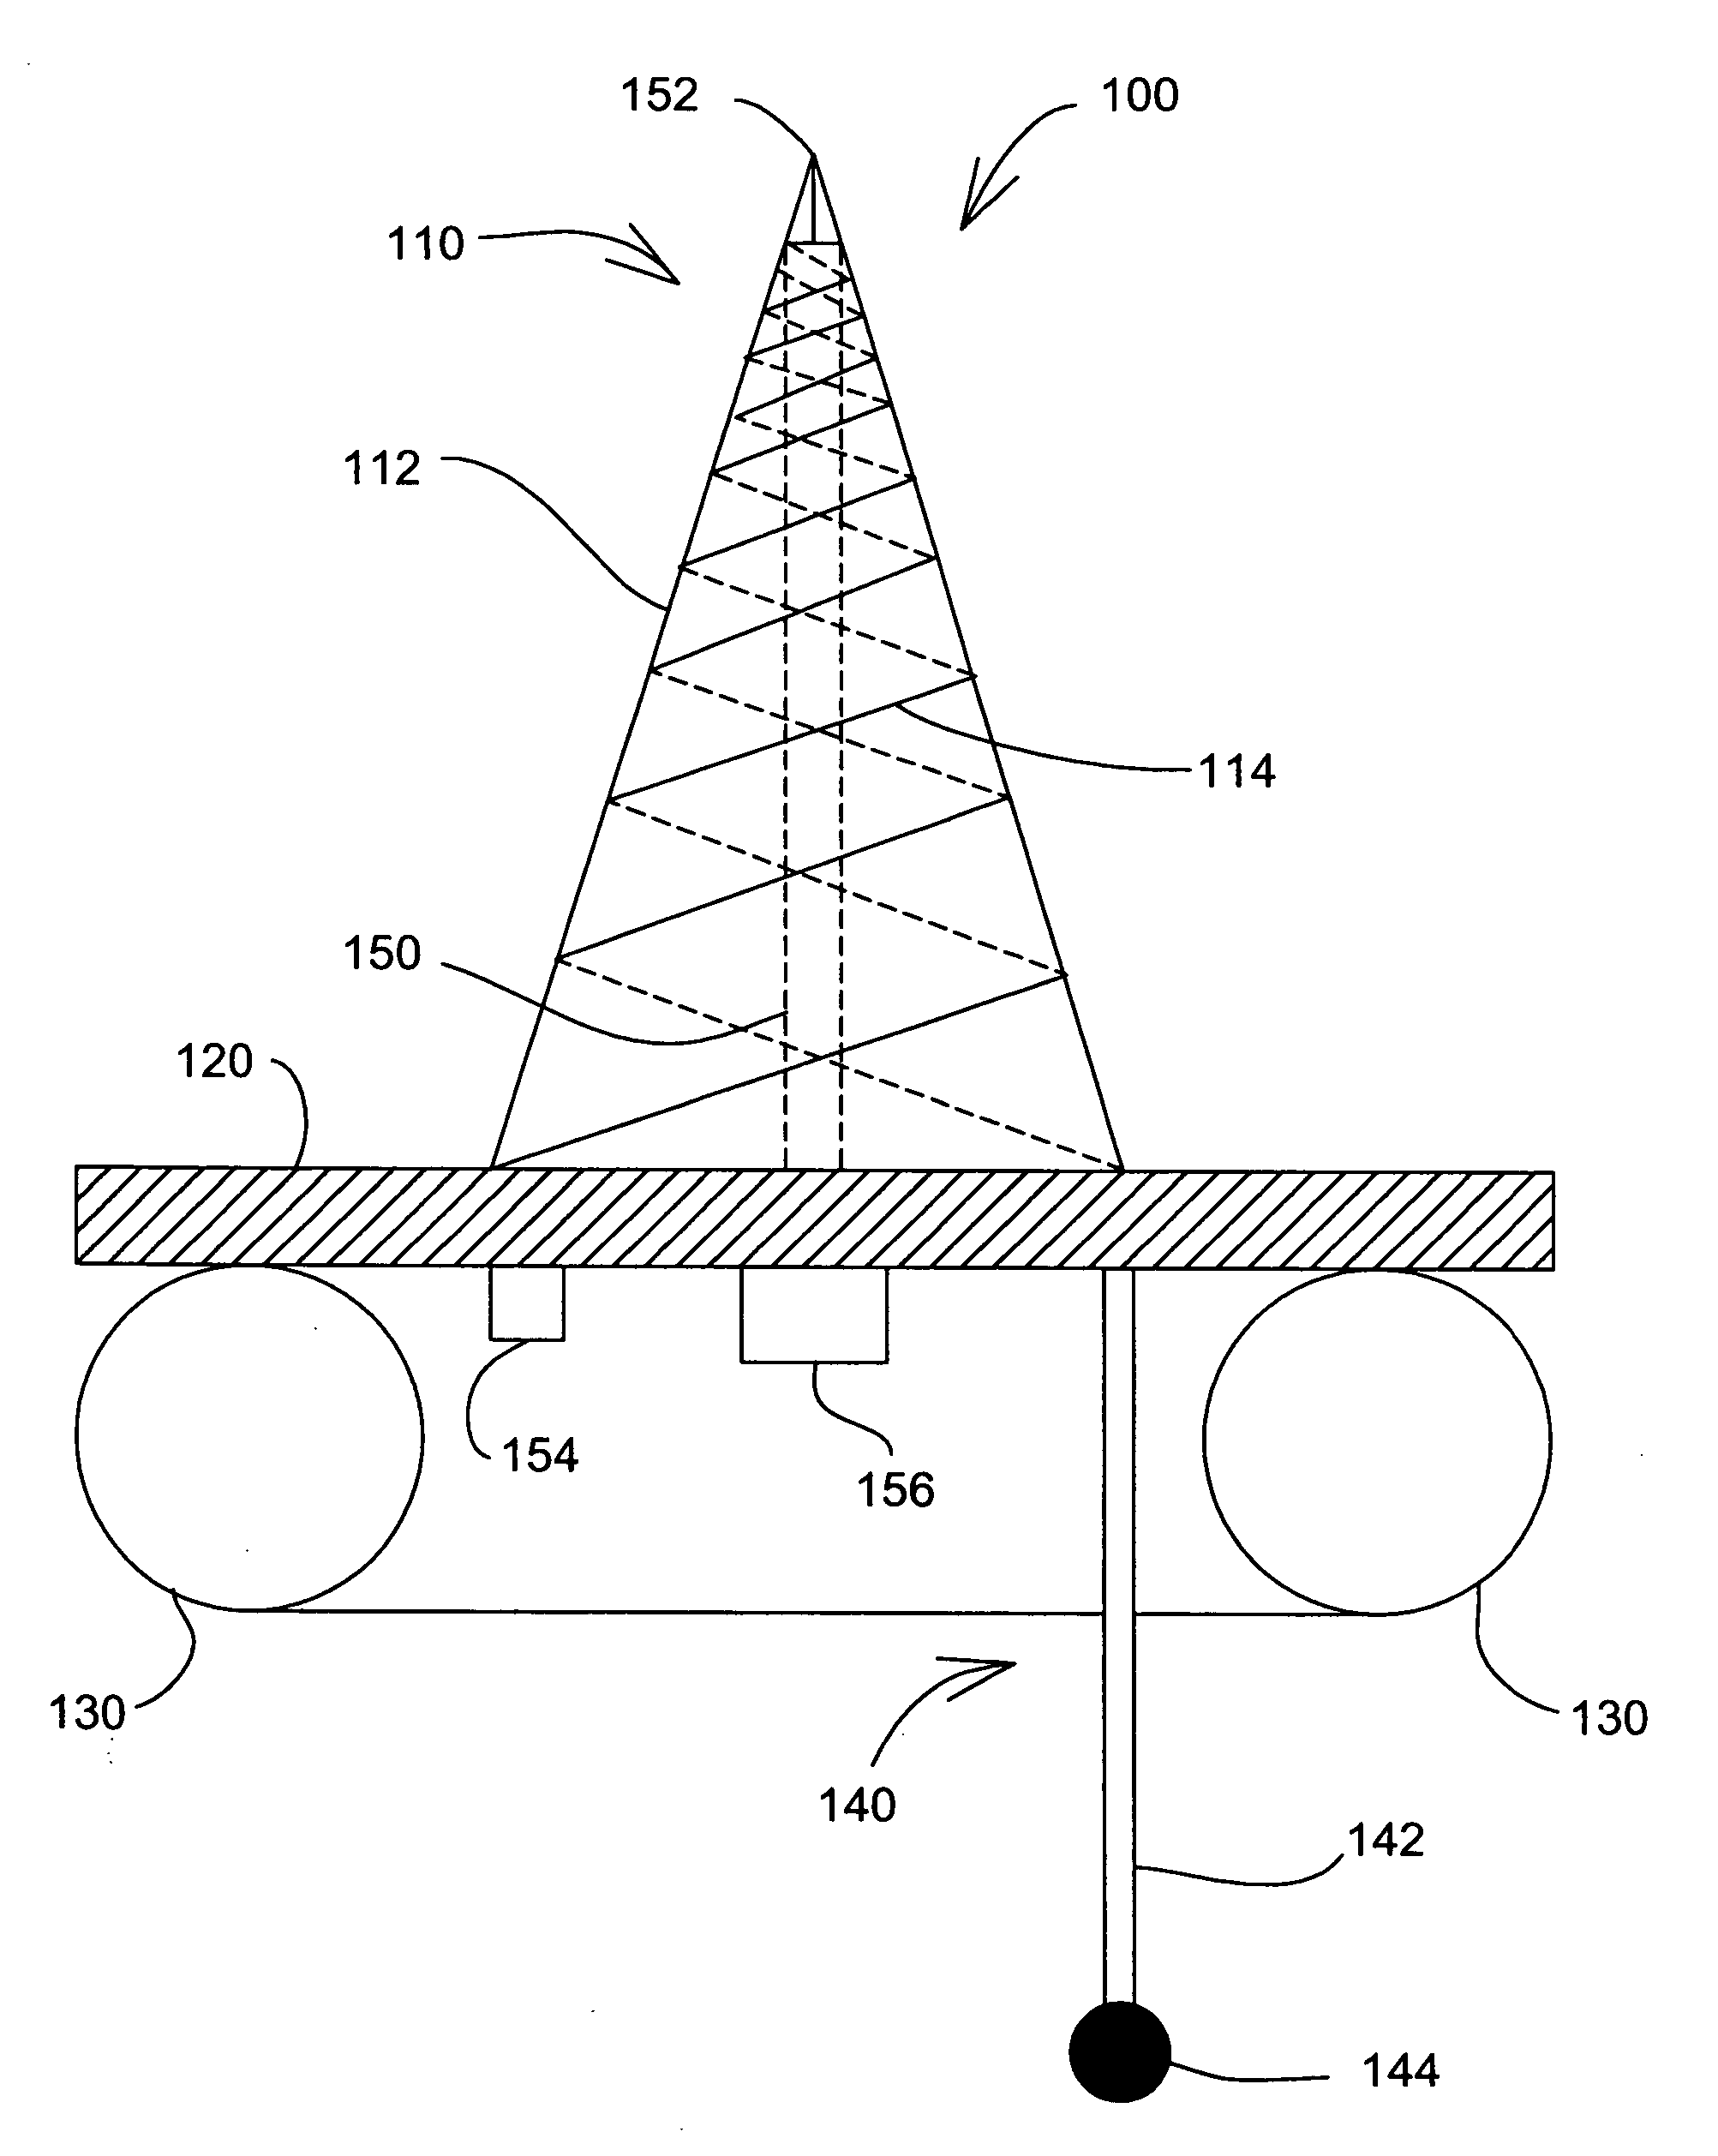 Inflatable antenna system